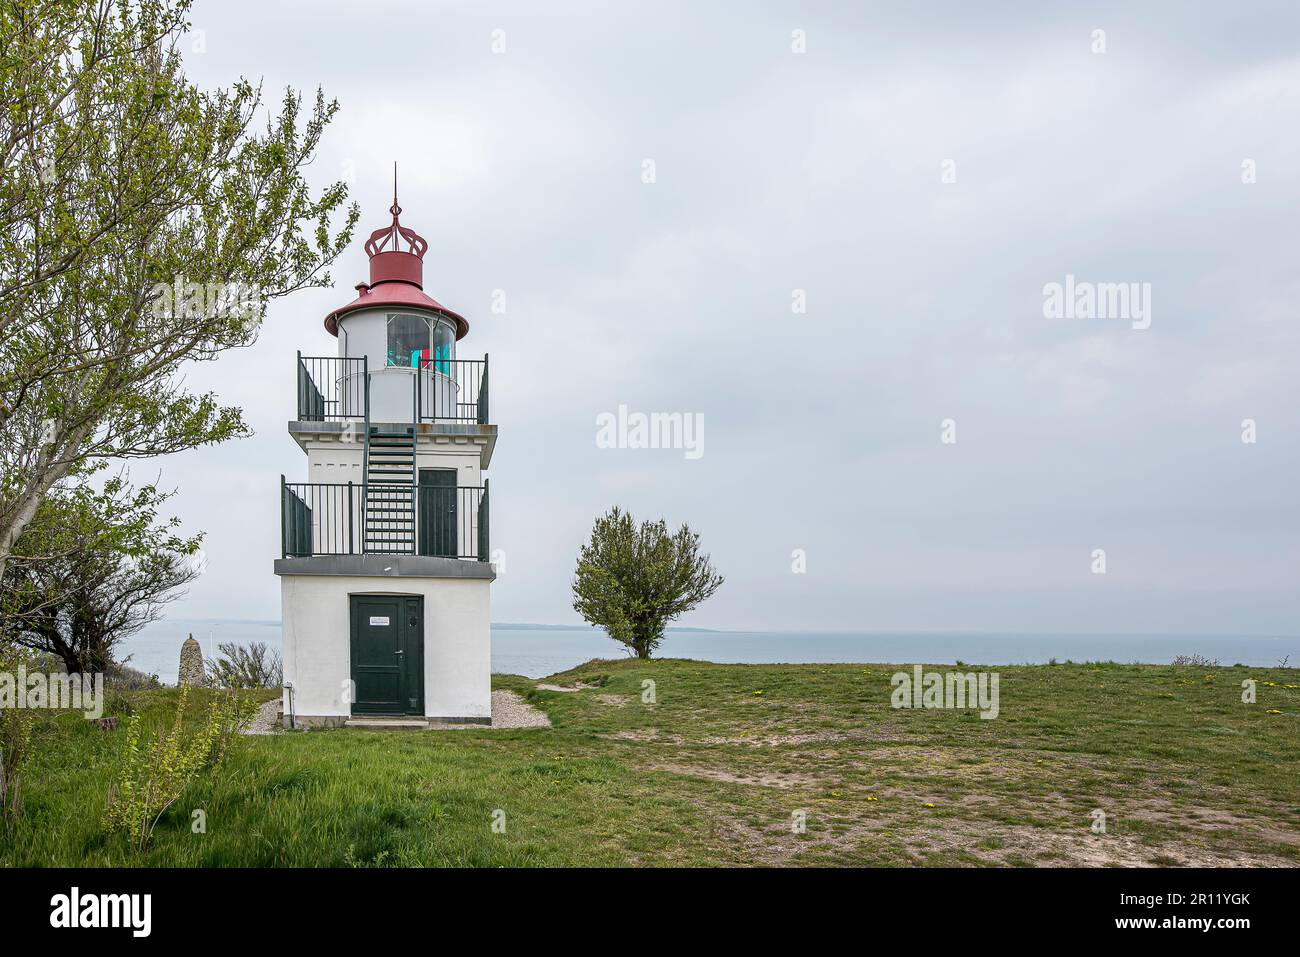 Spodsbjerg lighthouse overlooking a green beach meadow and the sea in the distance, Hundested, Denmark, May 10, 2021 Stock Photo